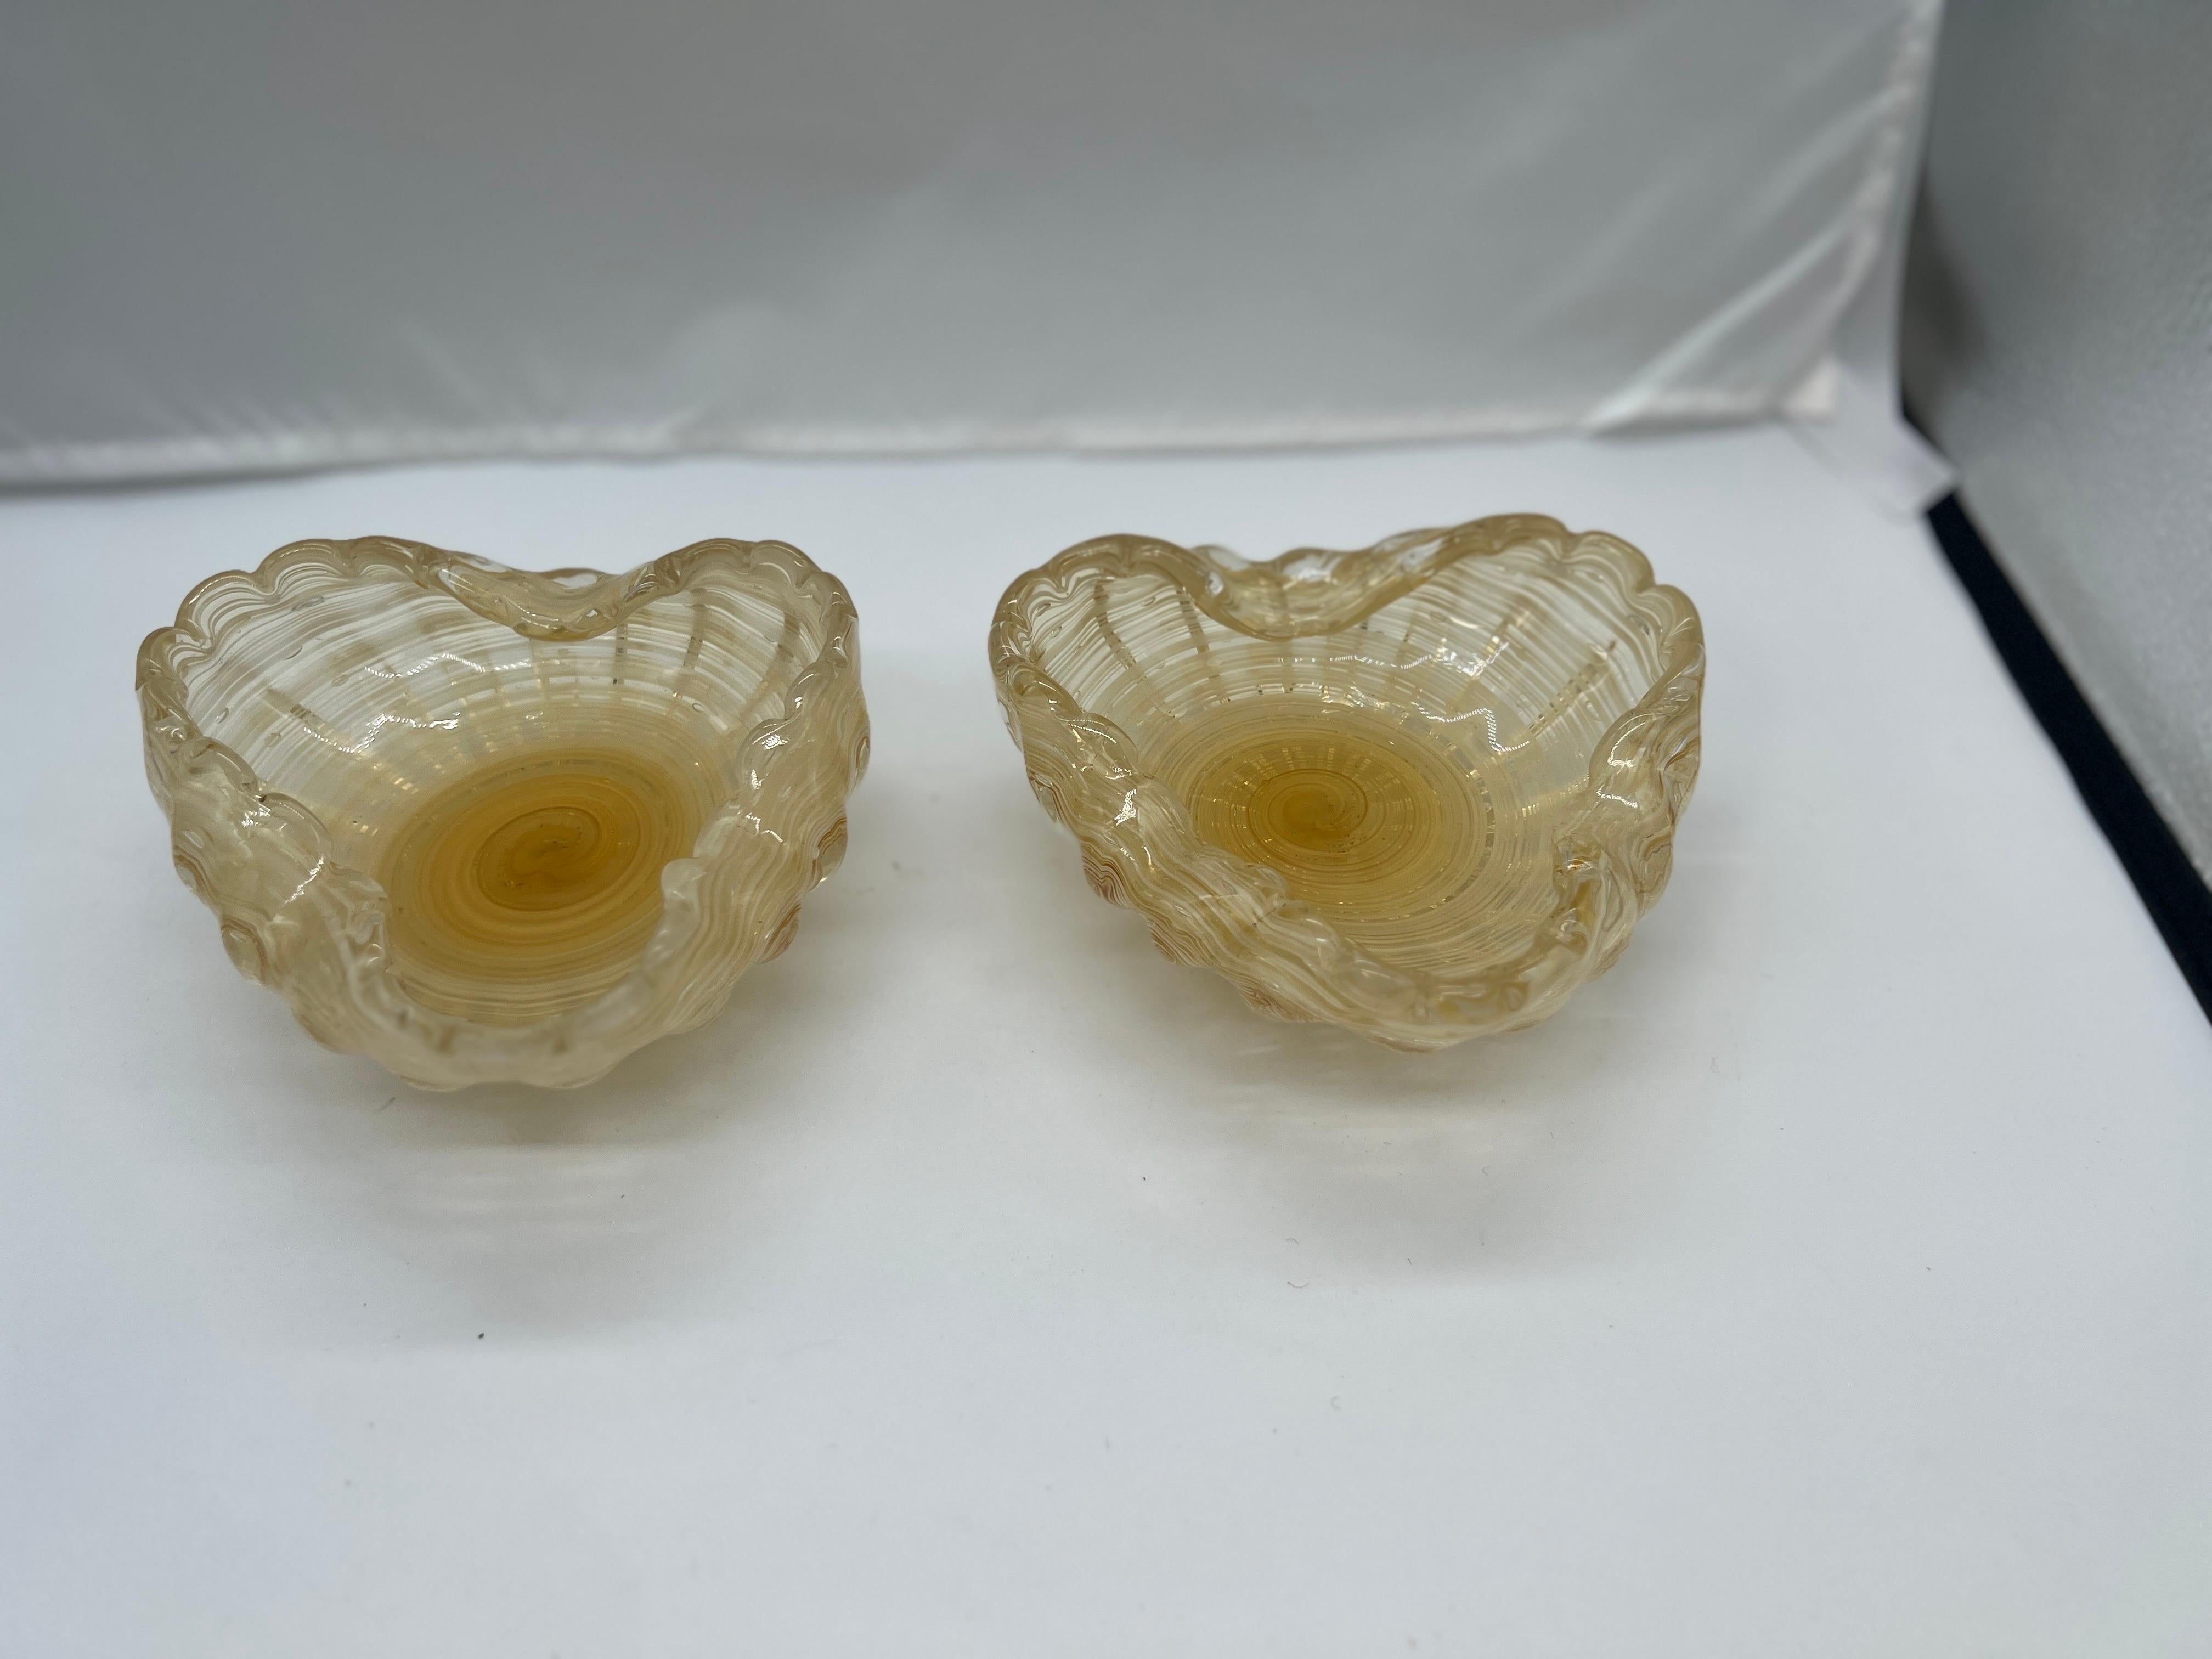 Italian Murano, 20th century.

A pair of beautiful gold speckled Murano Art Glass catch-all dishes or ashtray bowls. Each piece has a 3 flattened lips for resting objects. The base with a swirled foot and cut pontil. Unmarked.